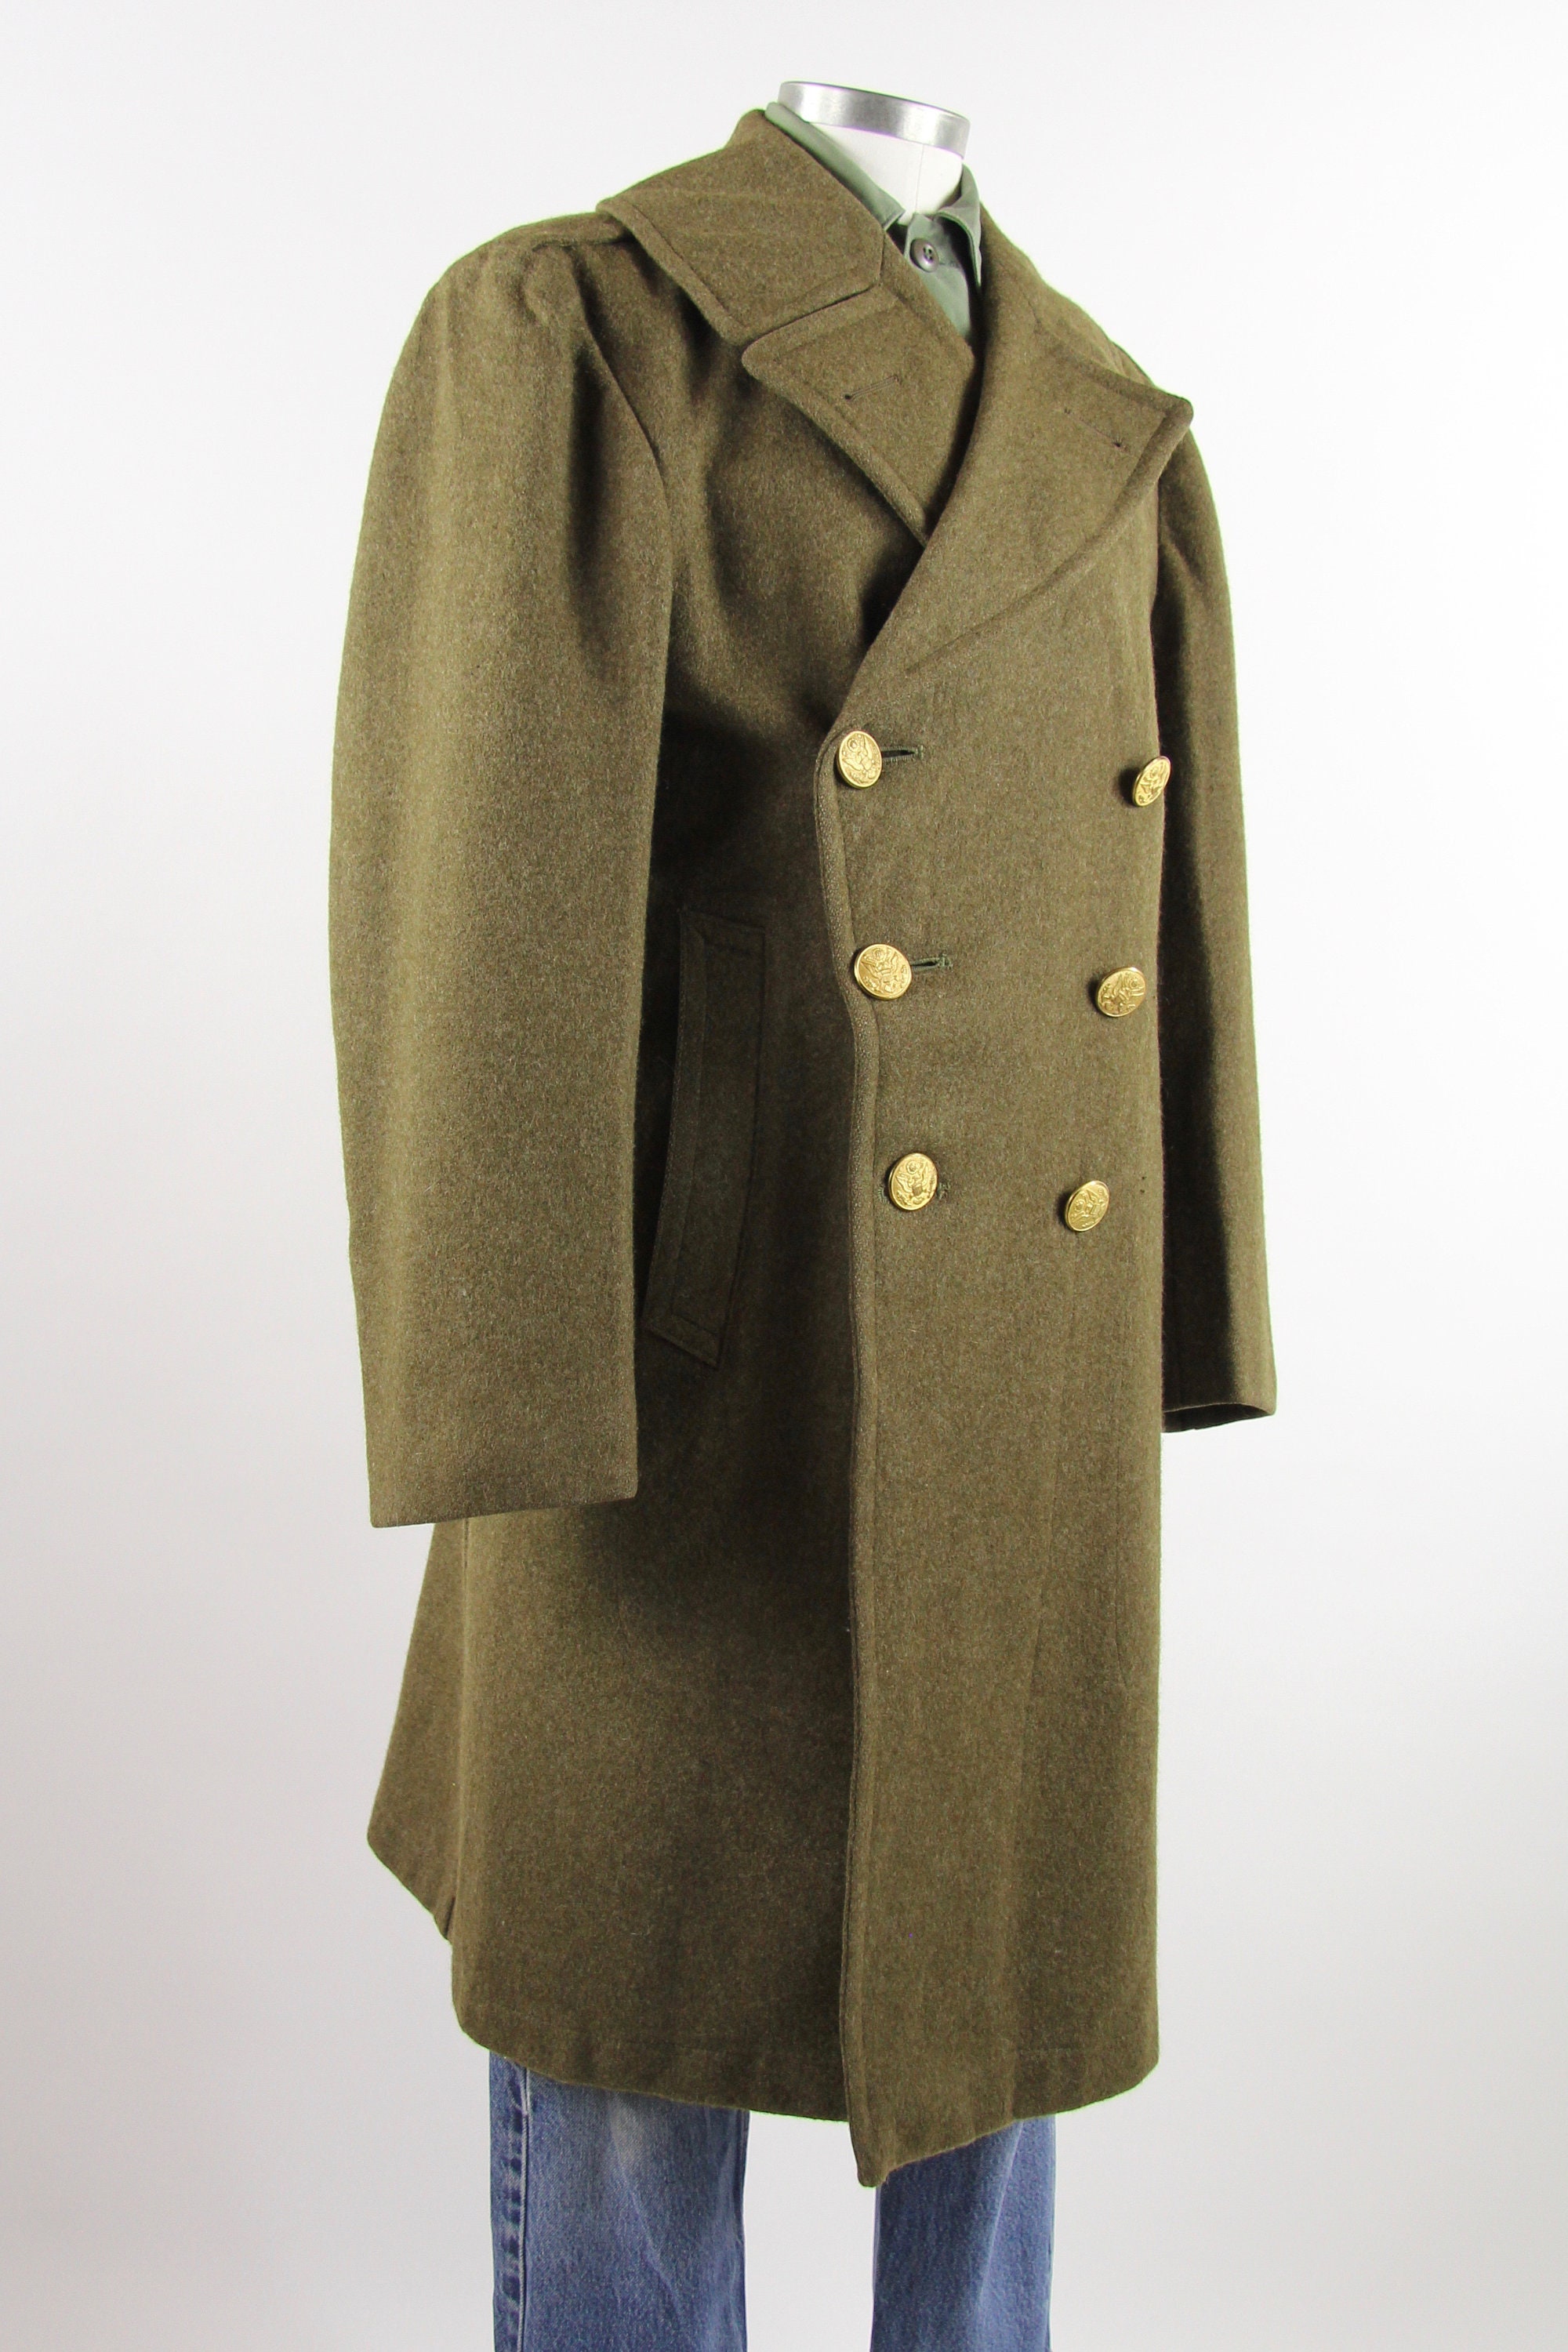 WWII Men's Military Coat Wool Gold Button Olive Green Trench Winter ...